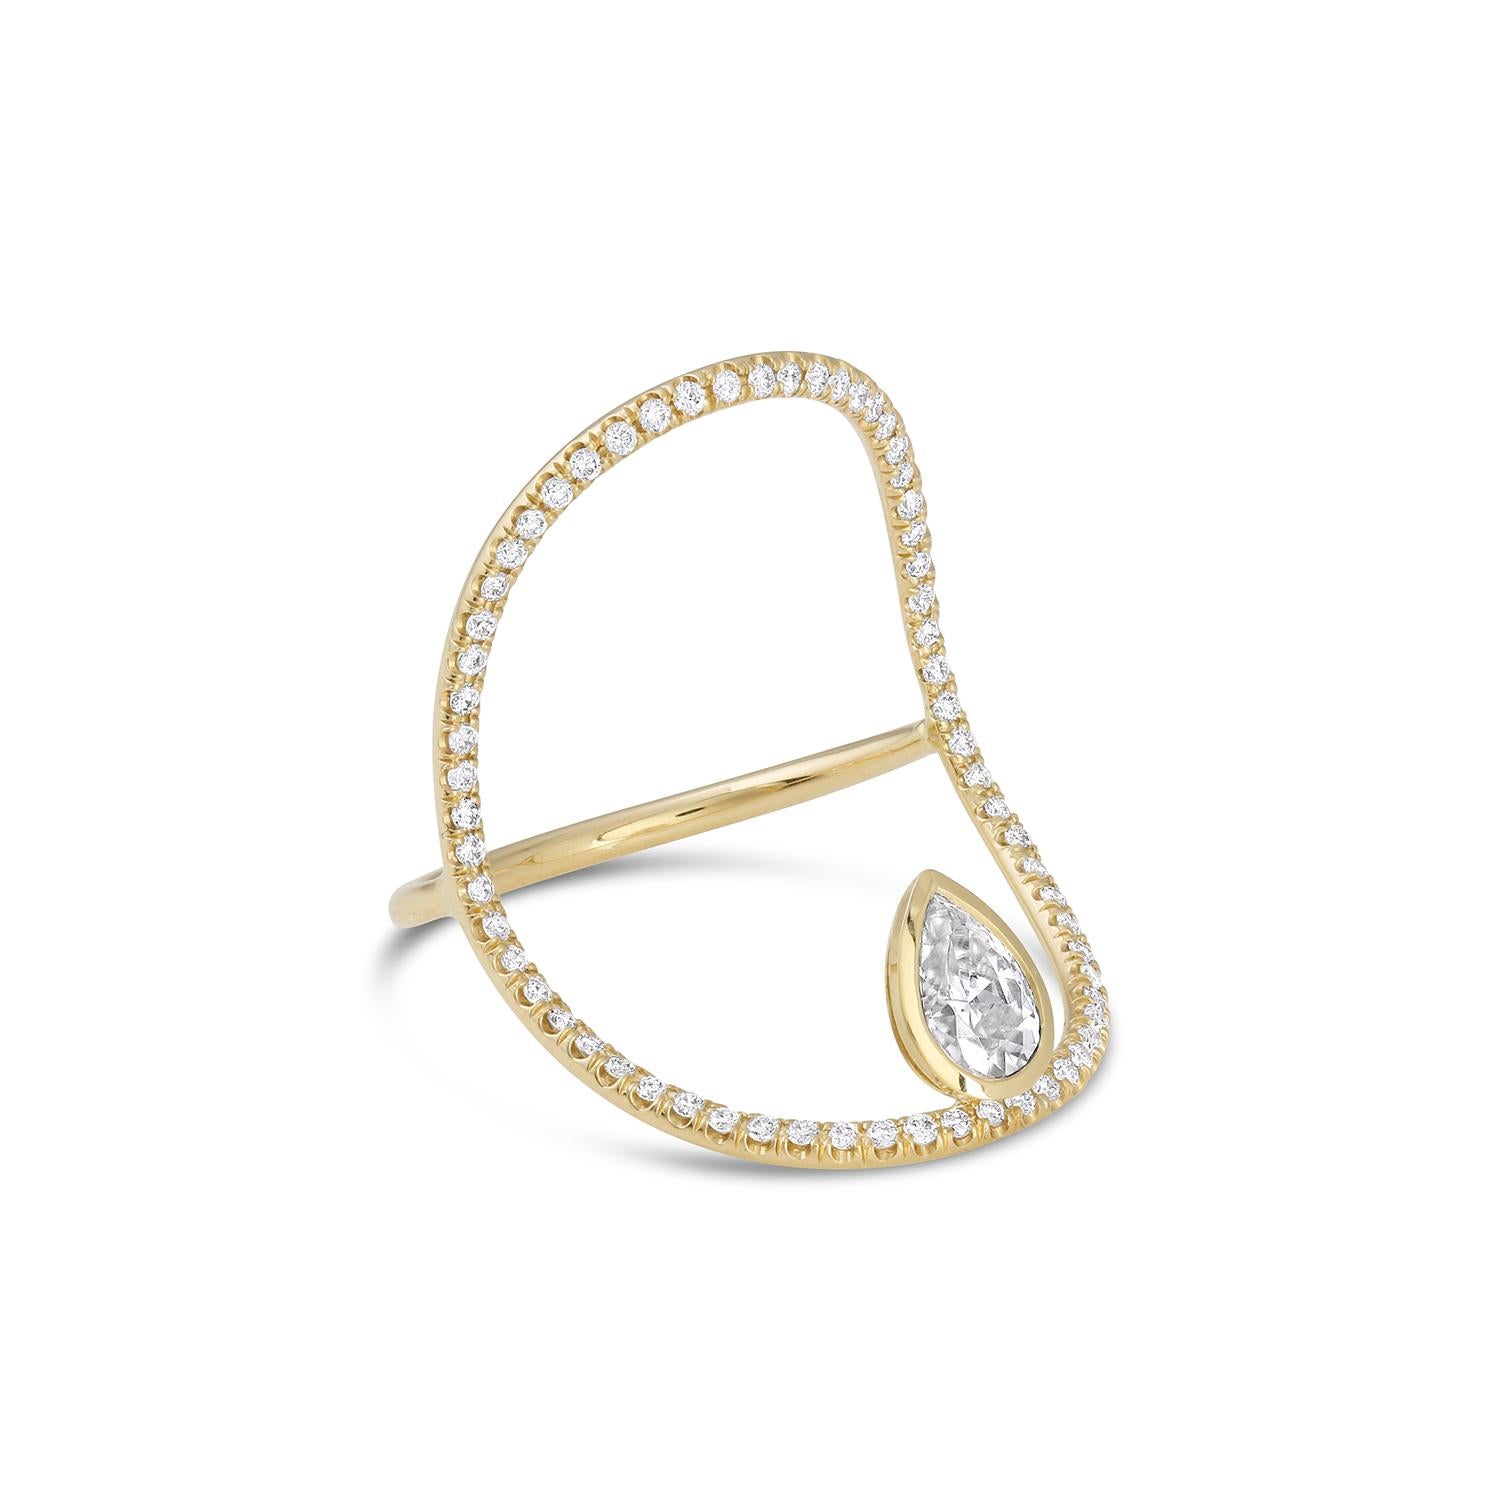 An elegant hand-formed solid 18k gold oval holds a brilliant white .30ct pear shaped diamond that's surrounded by sparkling pavé diamonds.  Bold and delicate at the same time - minimal with a bit of surrealist magic, it's streamlined design makes it